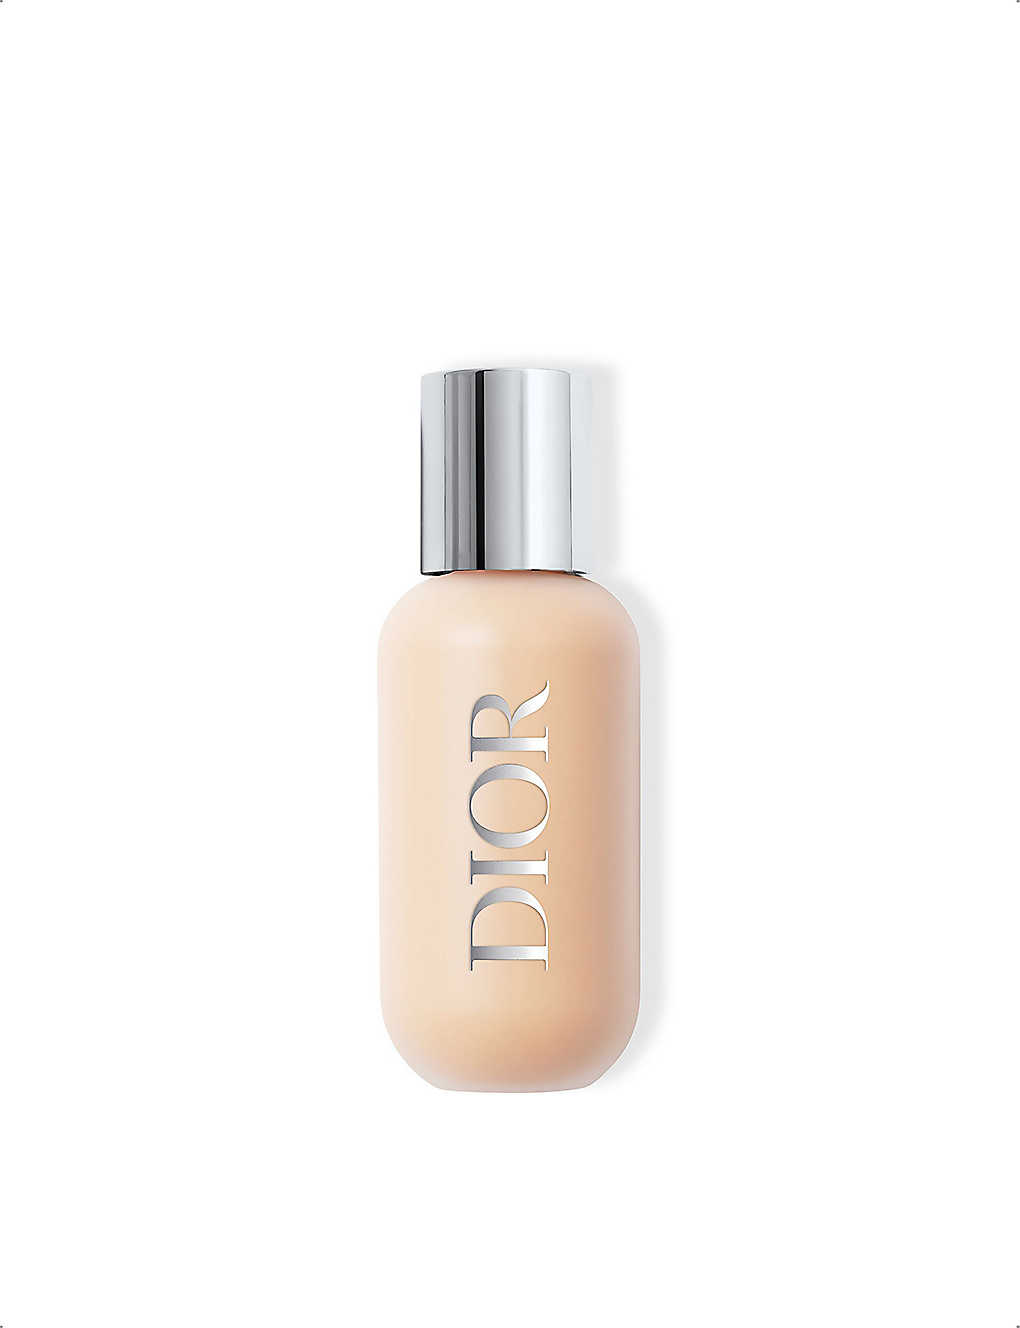 Dior Backstage Face & Body Foundation 50ml In 1.5n